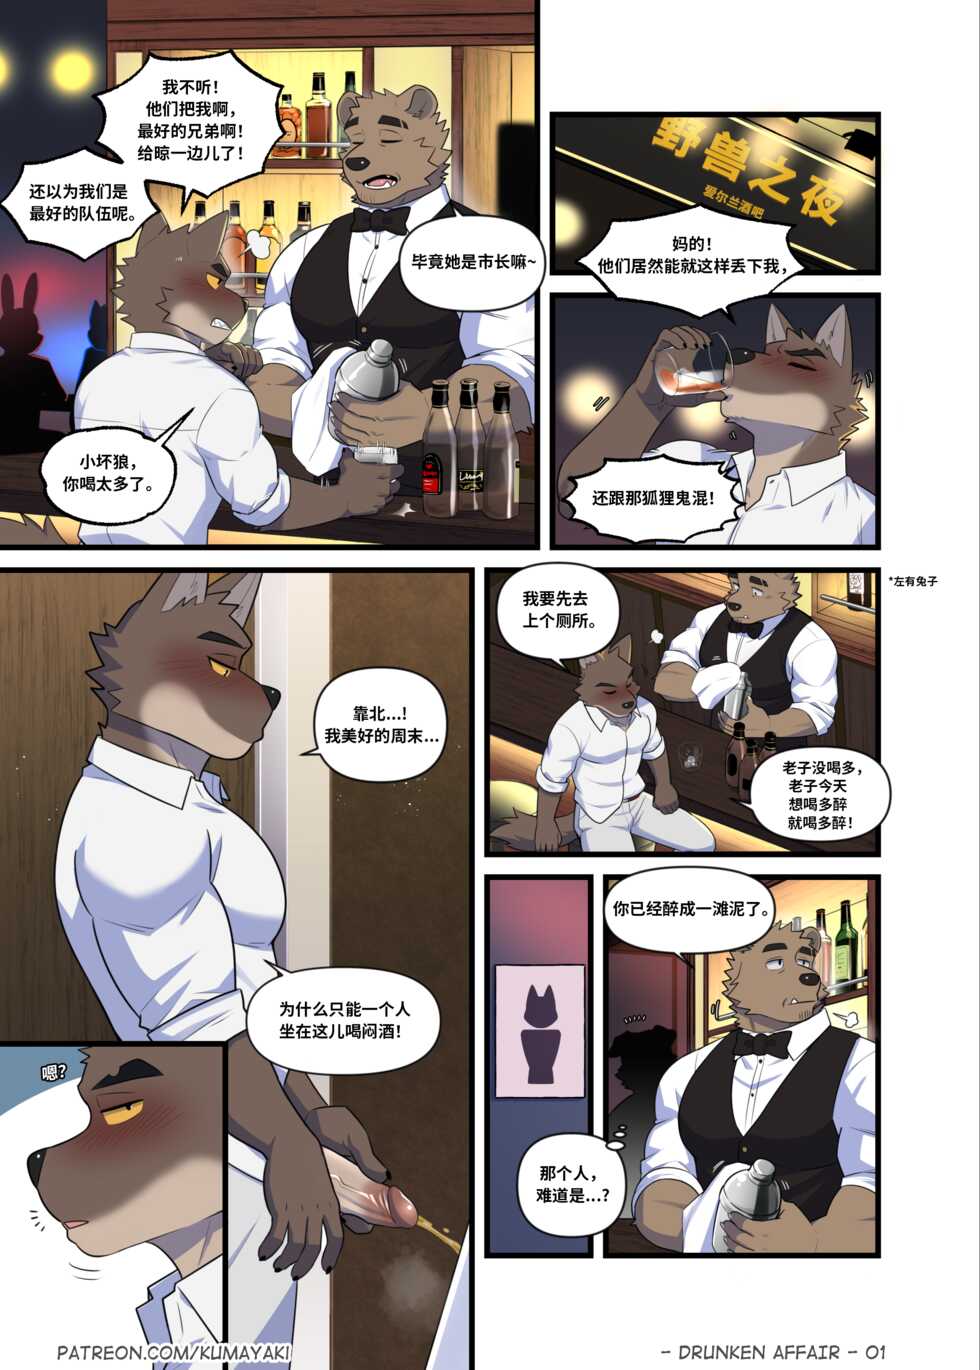 [Luwei] Drunken Affair 狗大汉化 {Uncensored} {HD} [Simplified Chinese] [Ongoing] - Page 4